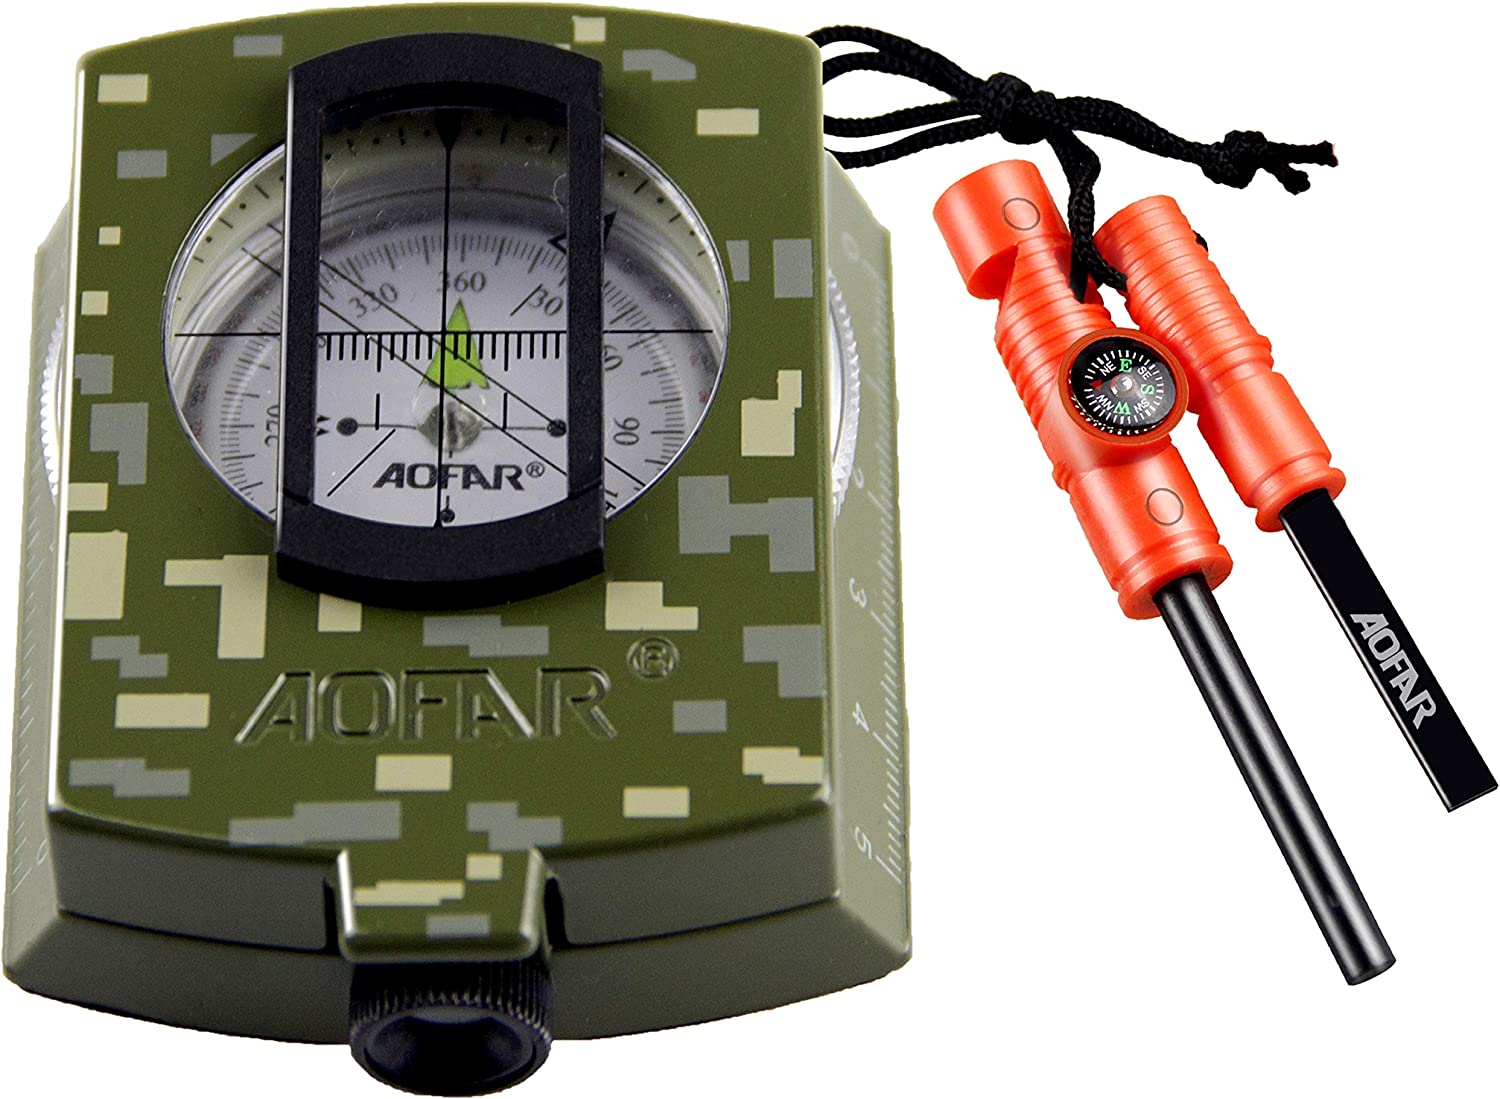 AOFAR Military Compass and Fire Starter AF-4580/381 Lensatic Sighting, Survival Kit,Waterproof and Shakeproof Measure Distance Calculator and Pouch for Camping, Hiking, Hunting, Backpacking